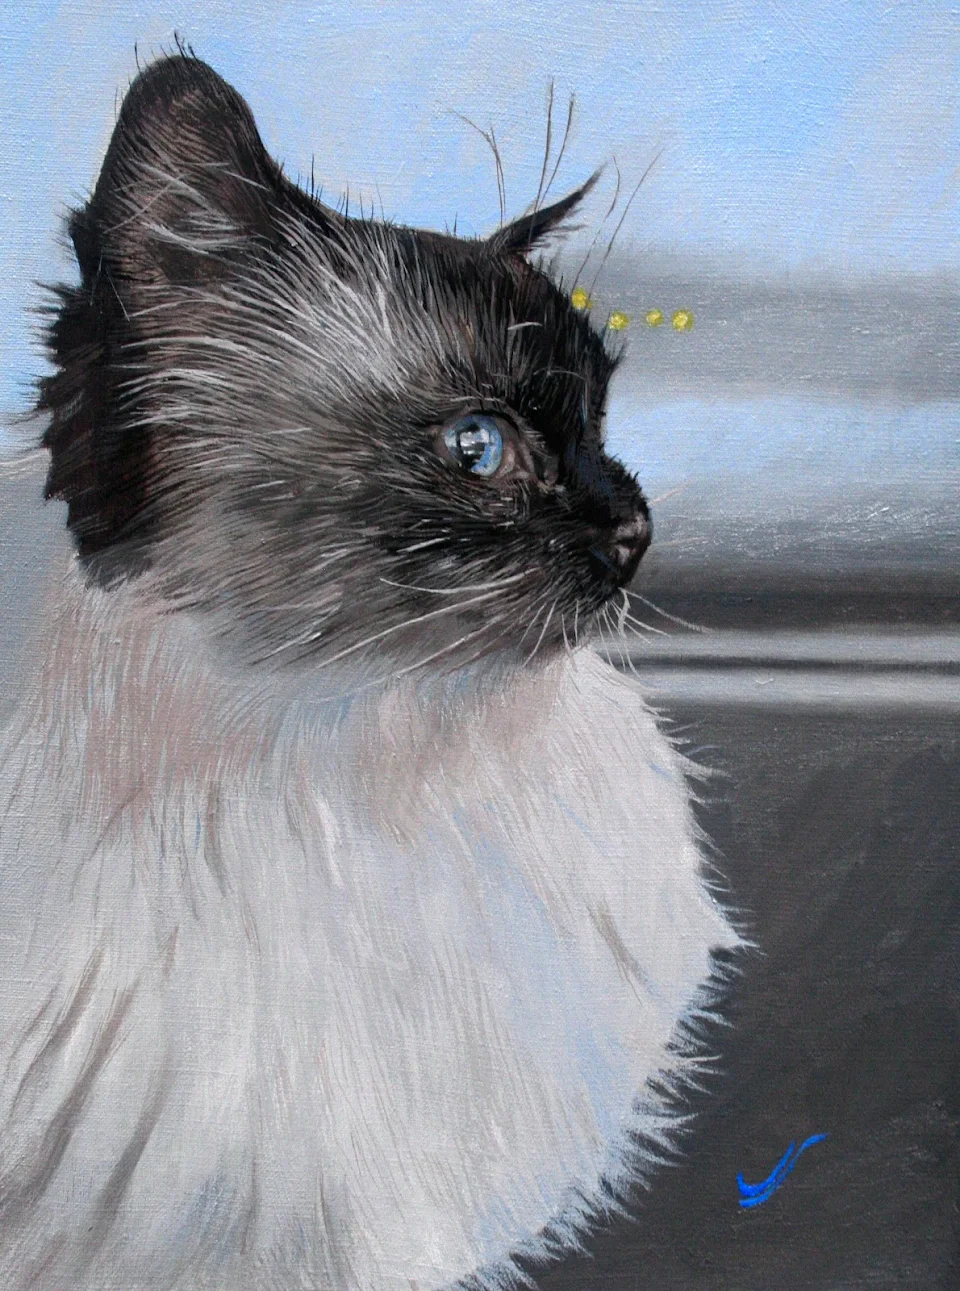 I painted a Redditor’s kitty in oils, I hope you like it!